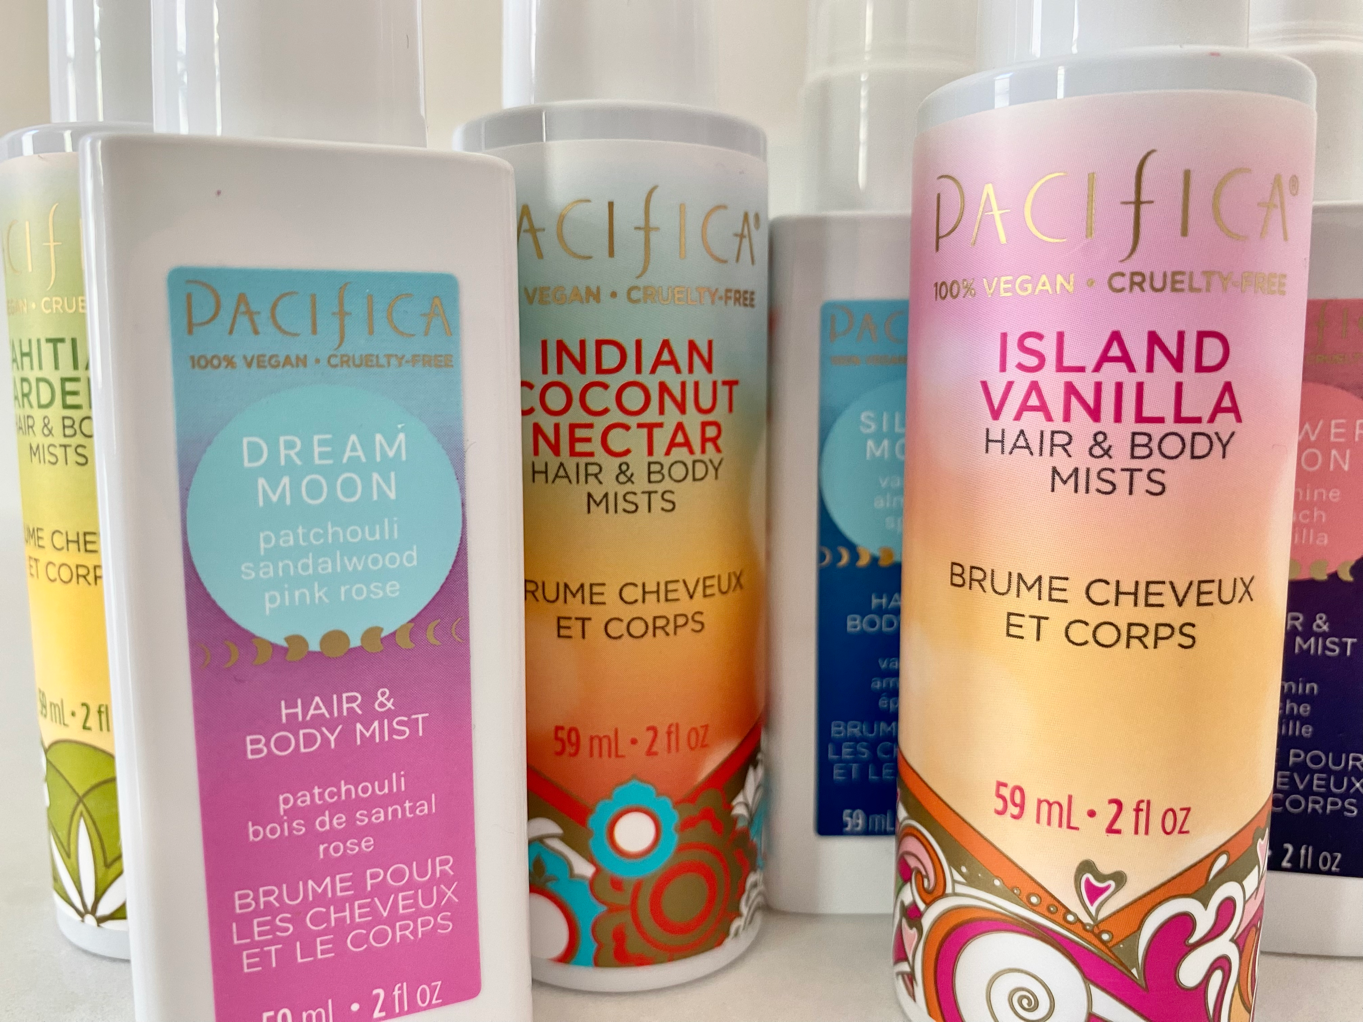 Pacifica Hair and Body Mists, Ranked